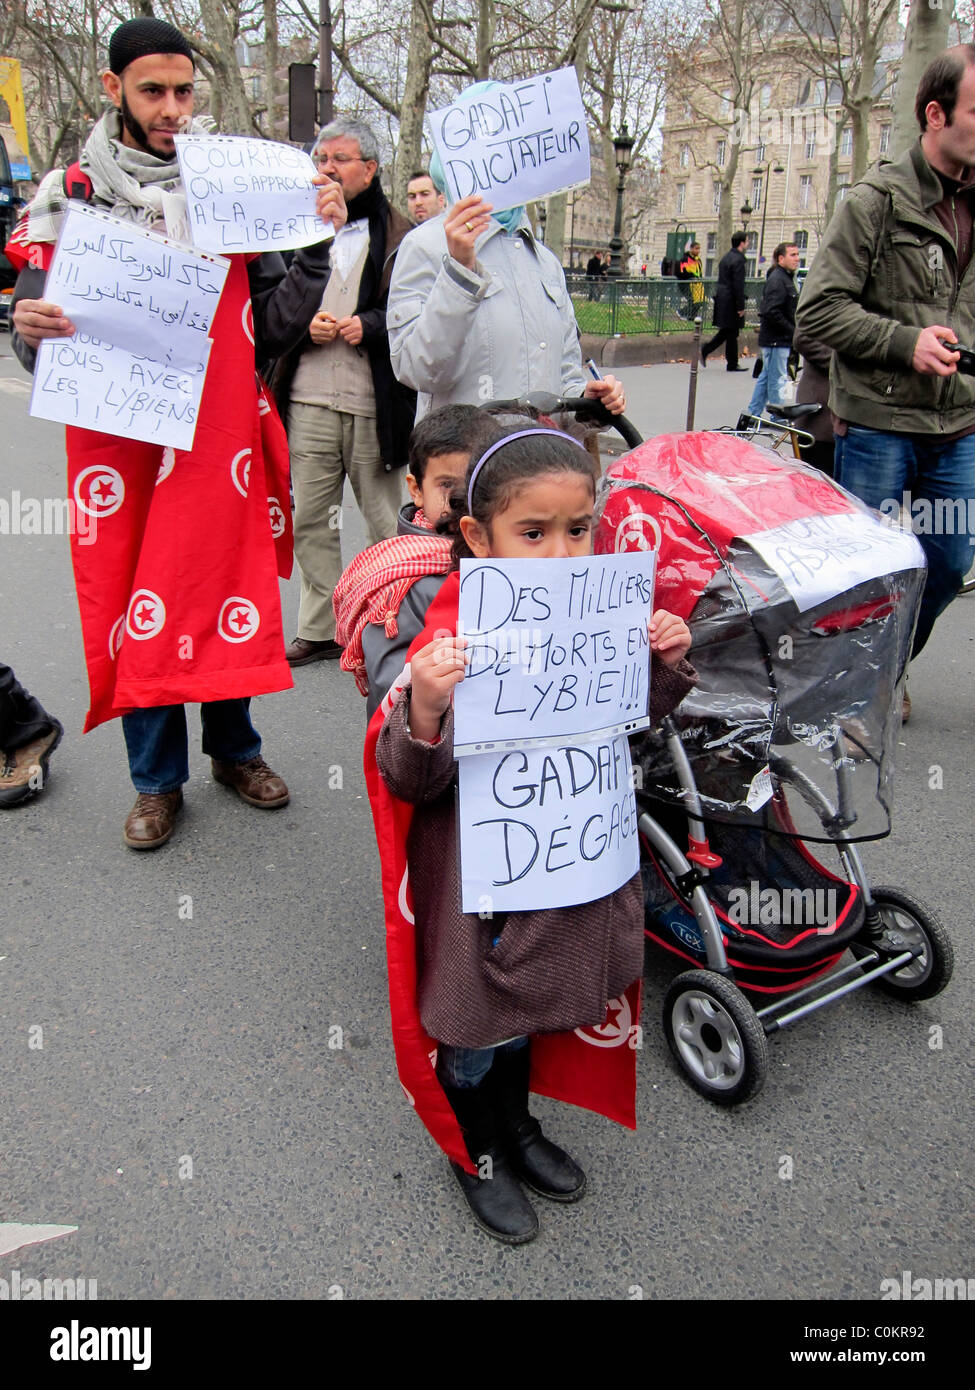 Paris, France, Public Demonstration, in Support of Libyan Revolution, Arabian Migrant Family Children Carrying French Protest Poster, with Young Children "Arab Spring" immigrants Europe Stock Photo